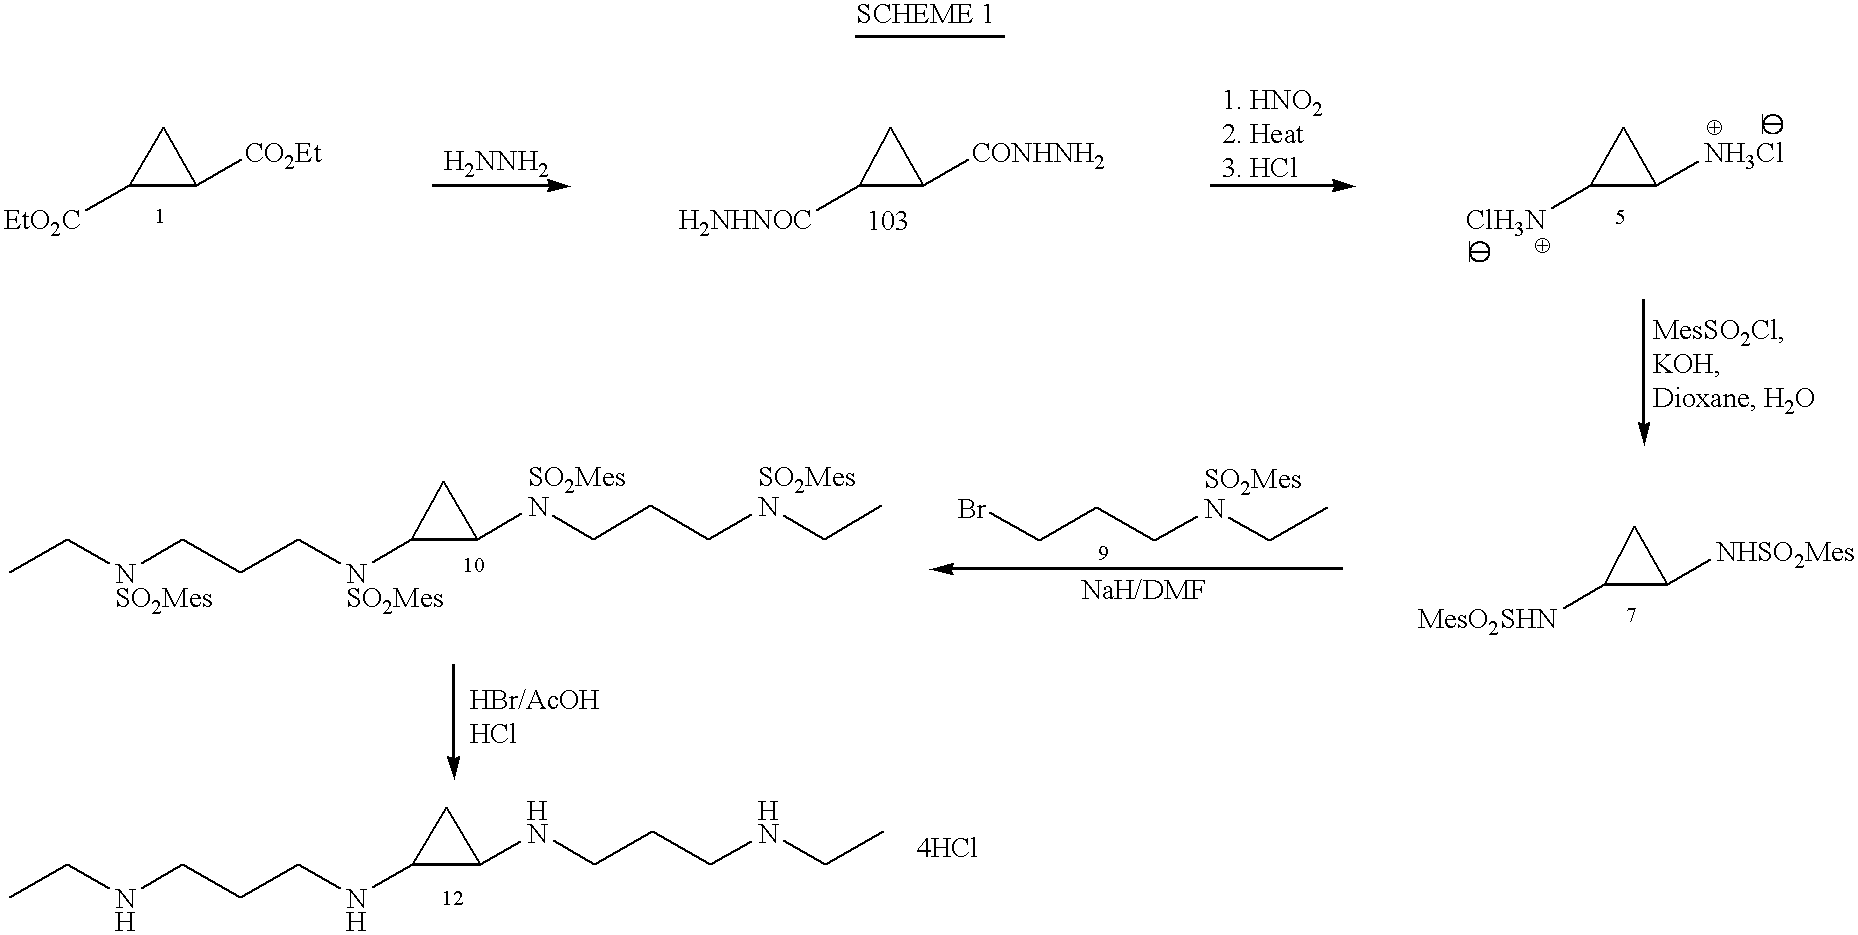 Conformationally restricted polyamines